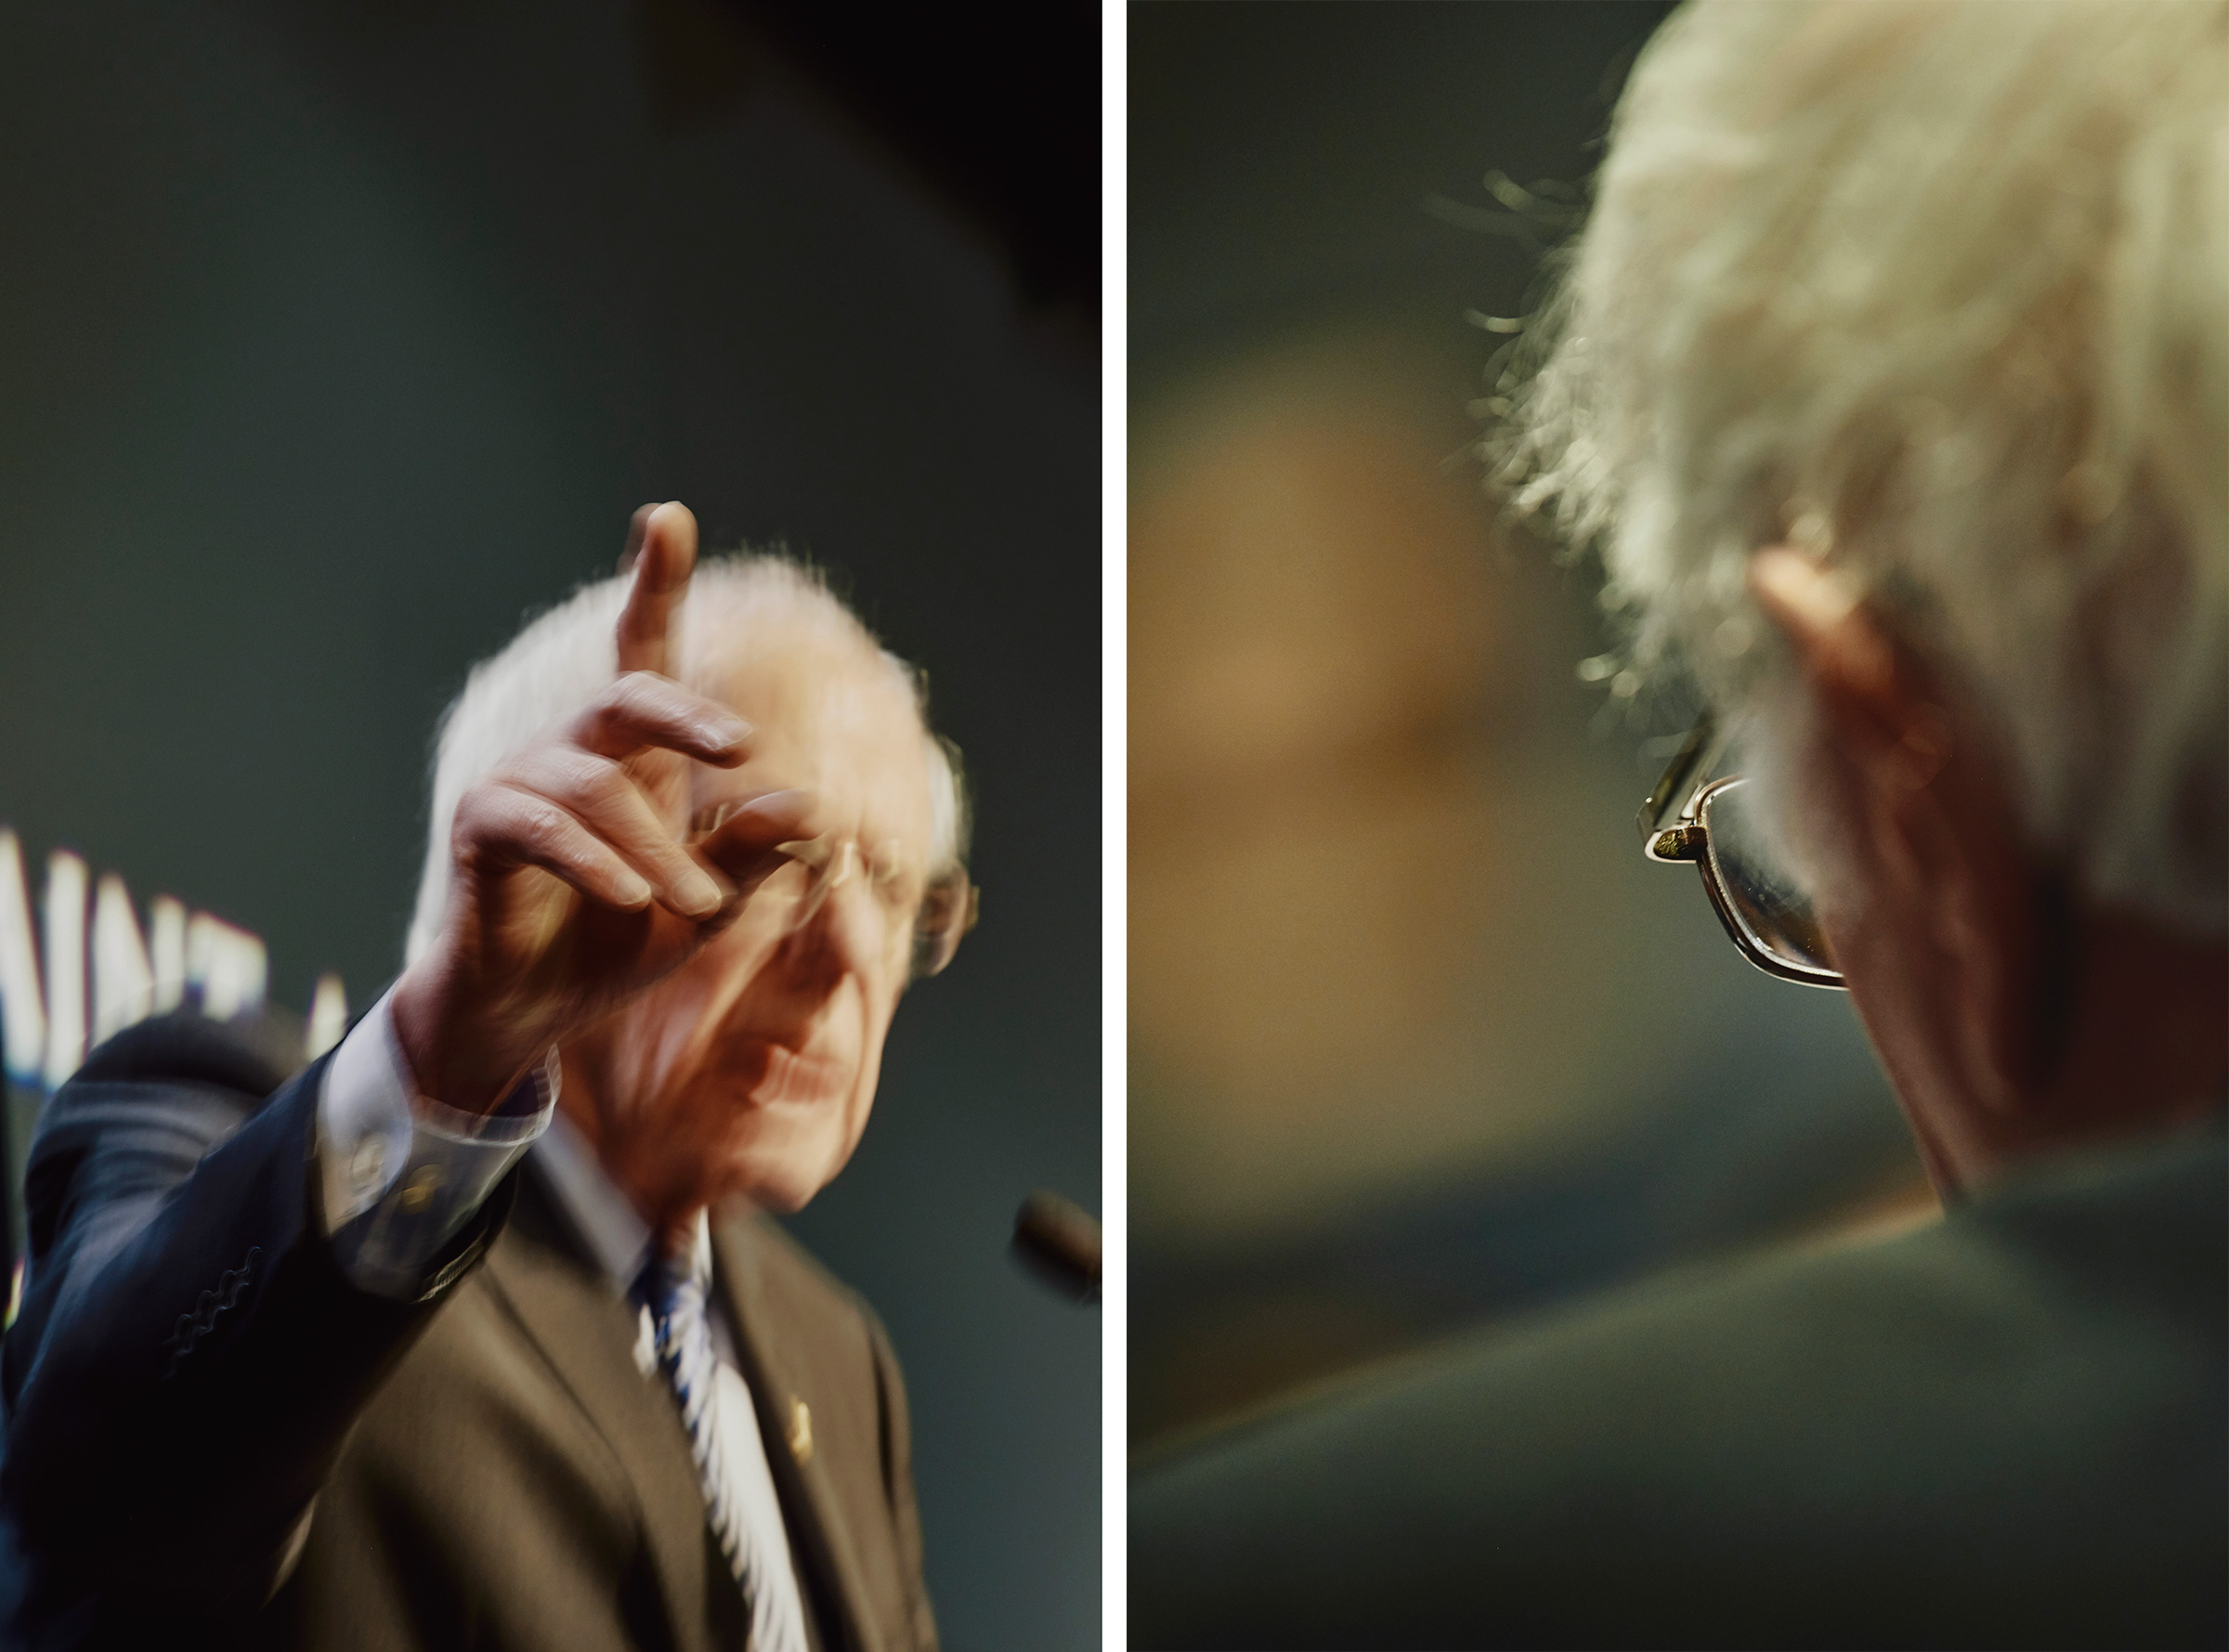 Bernie Sanders speaks at a campaign event in Manchester, N.H. on Feb. 7, 2020. (Tony Luong for TIME)